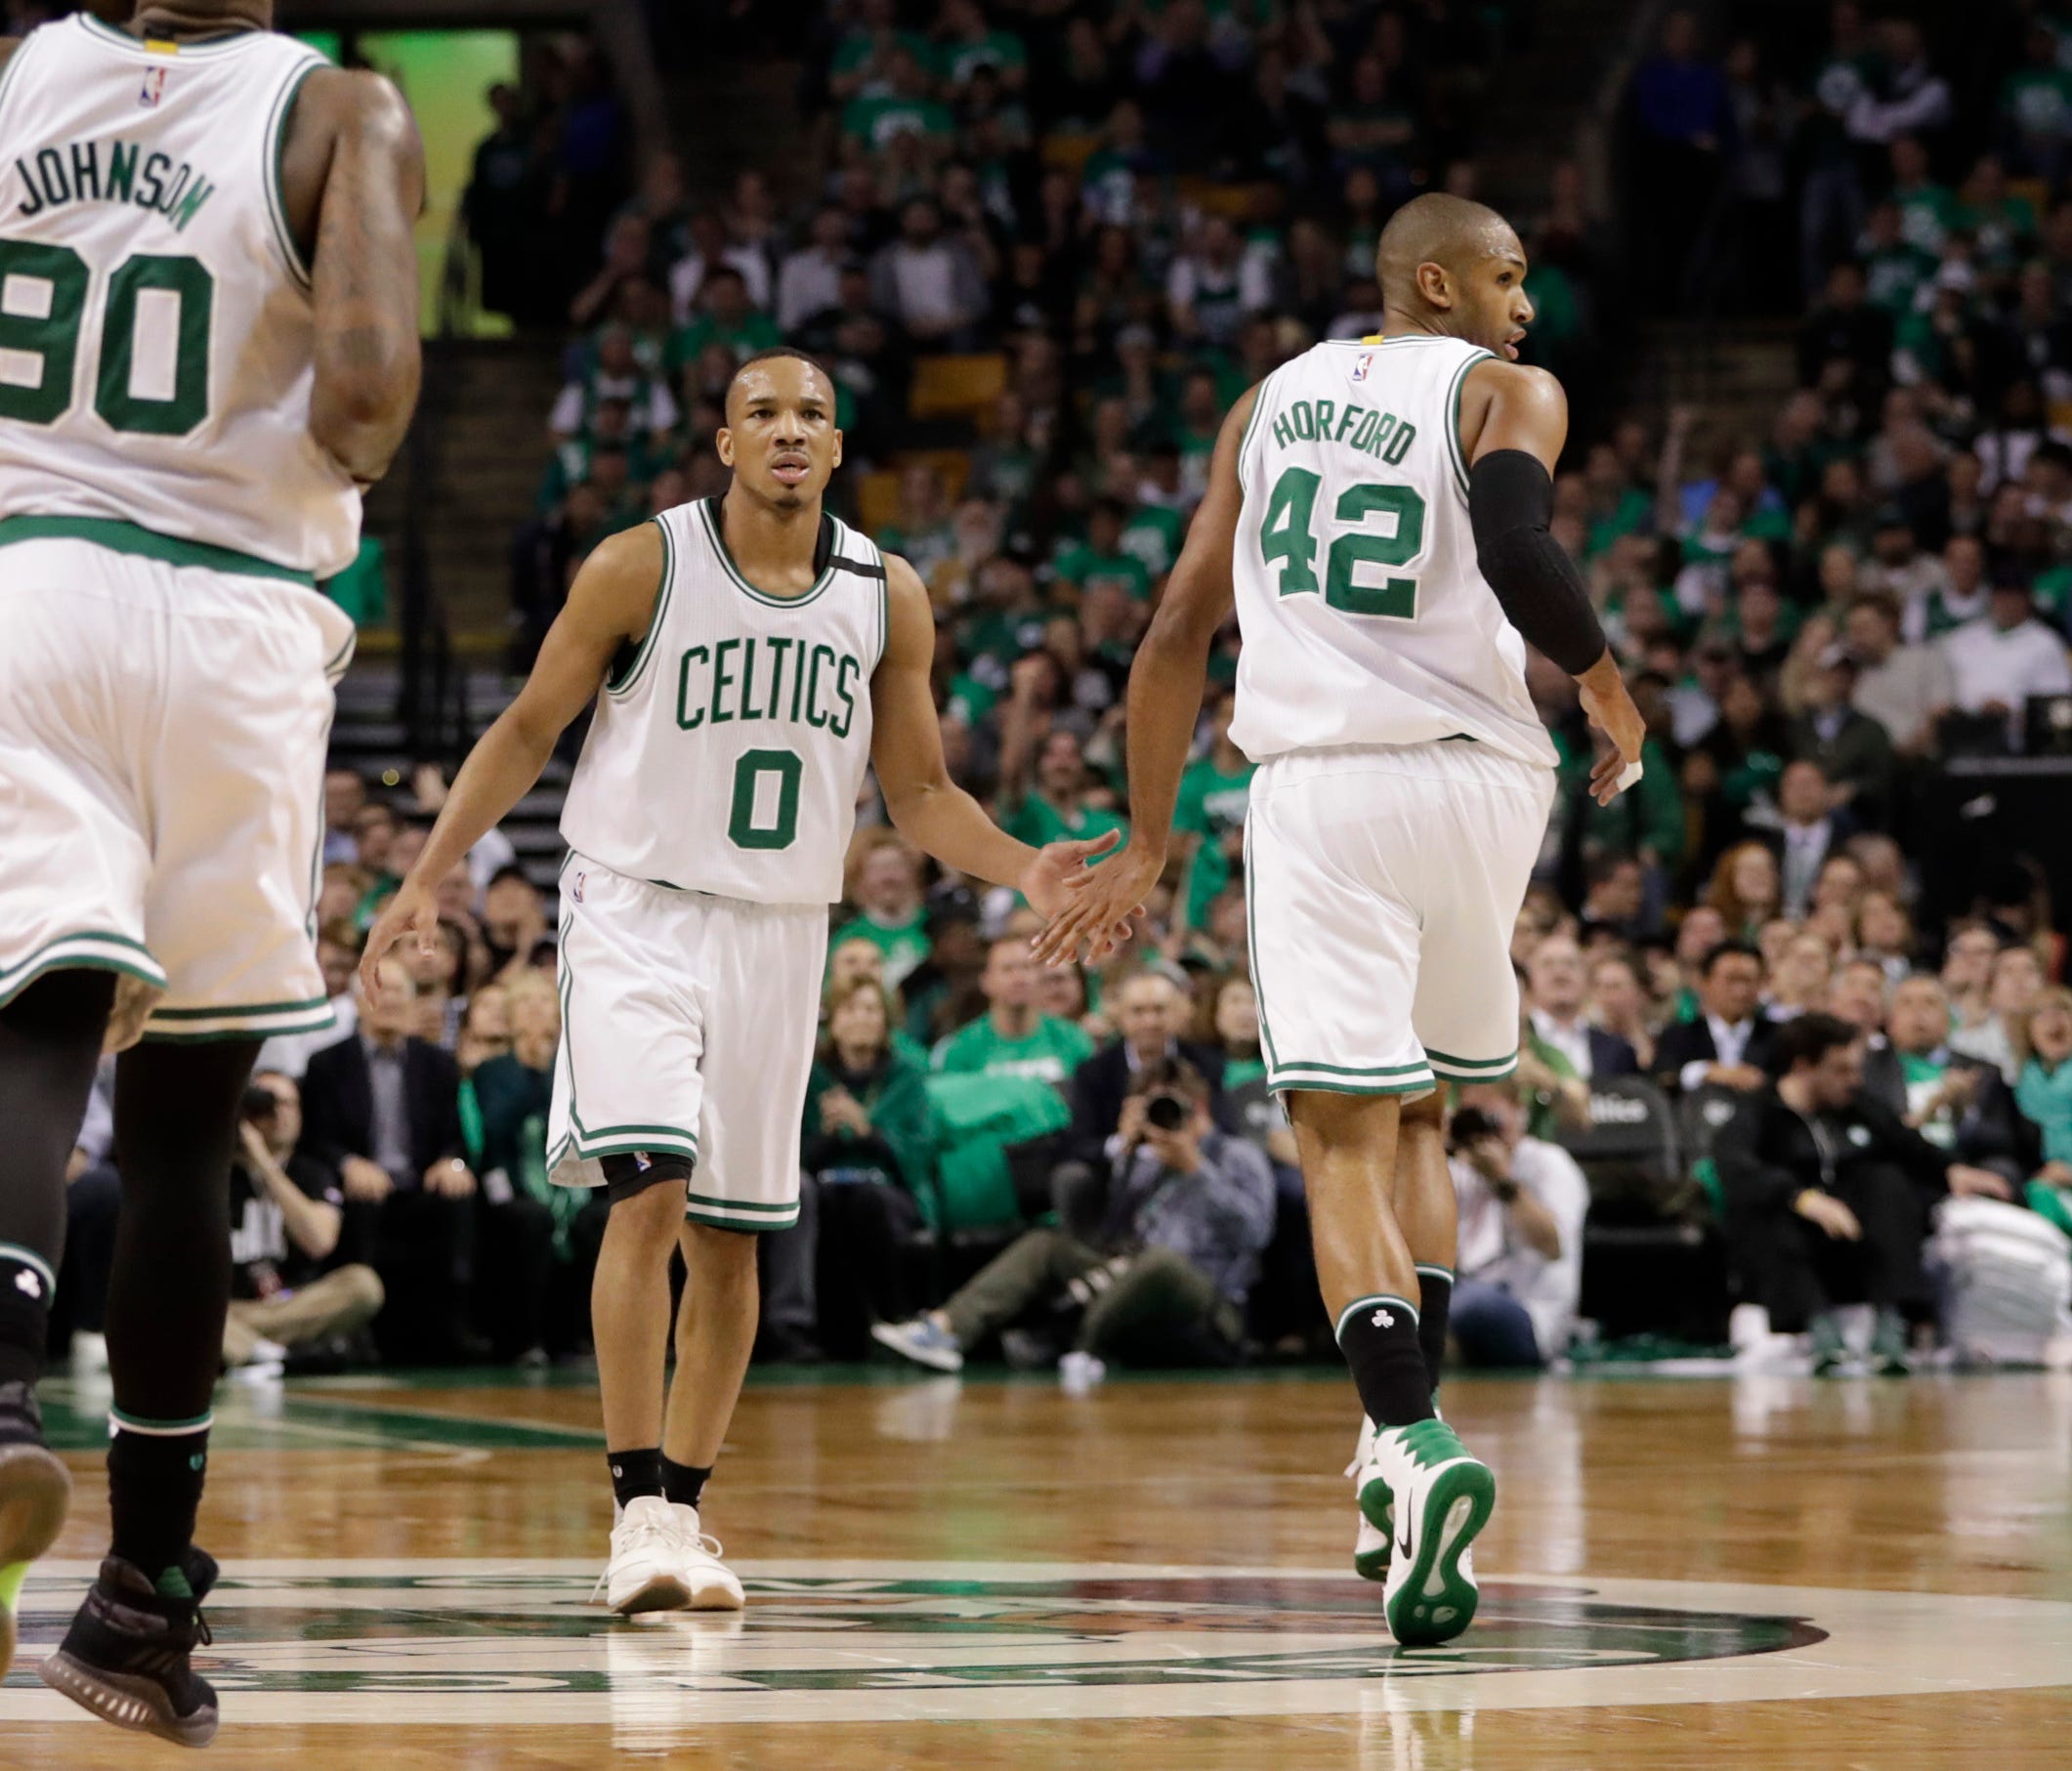 Boston Celtics guard Avery Bradley (0) and center Al Horford (42) react to a play against the Washington Wizards during the second half in Game 5.